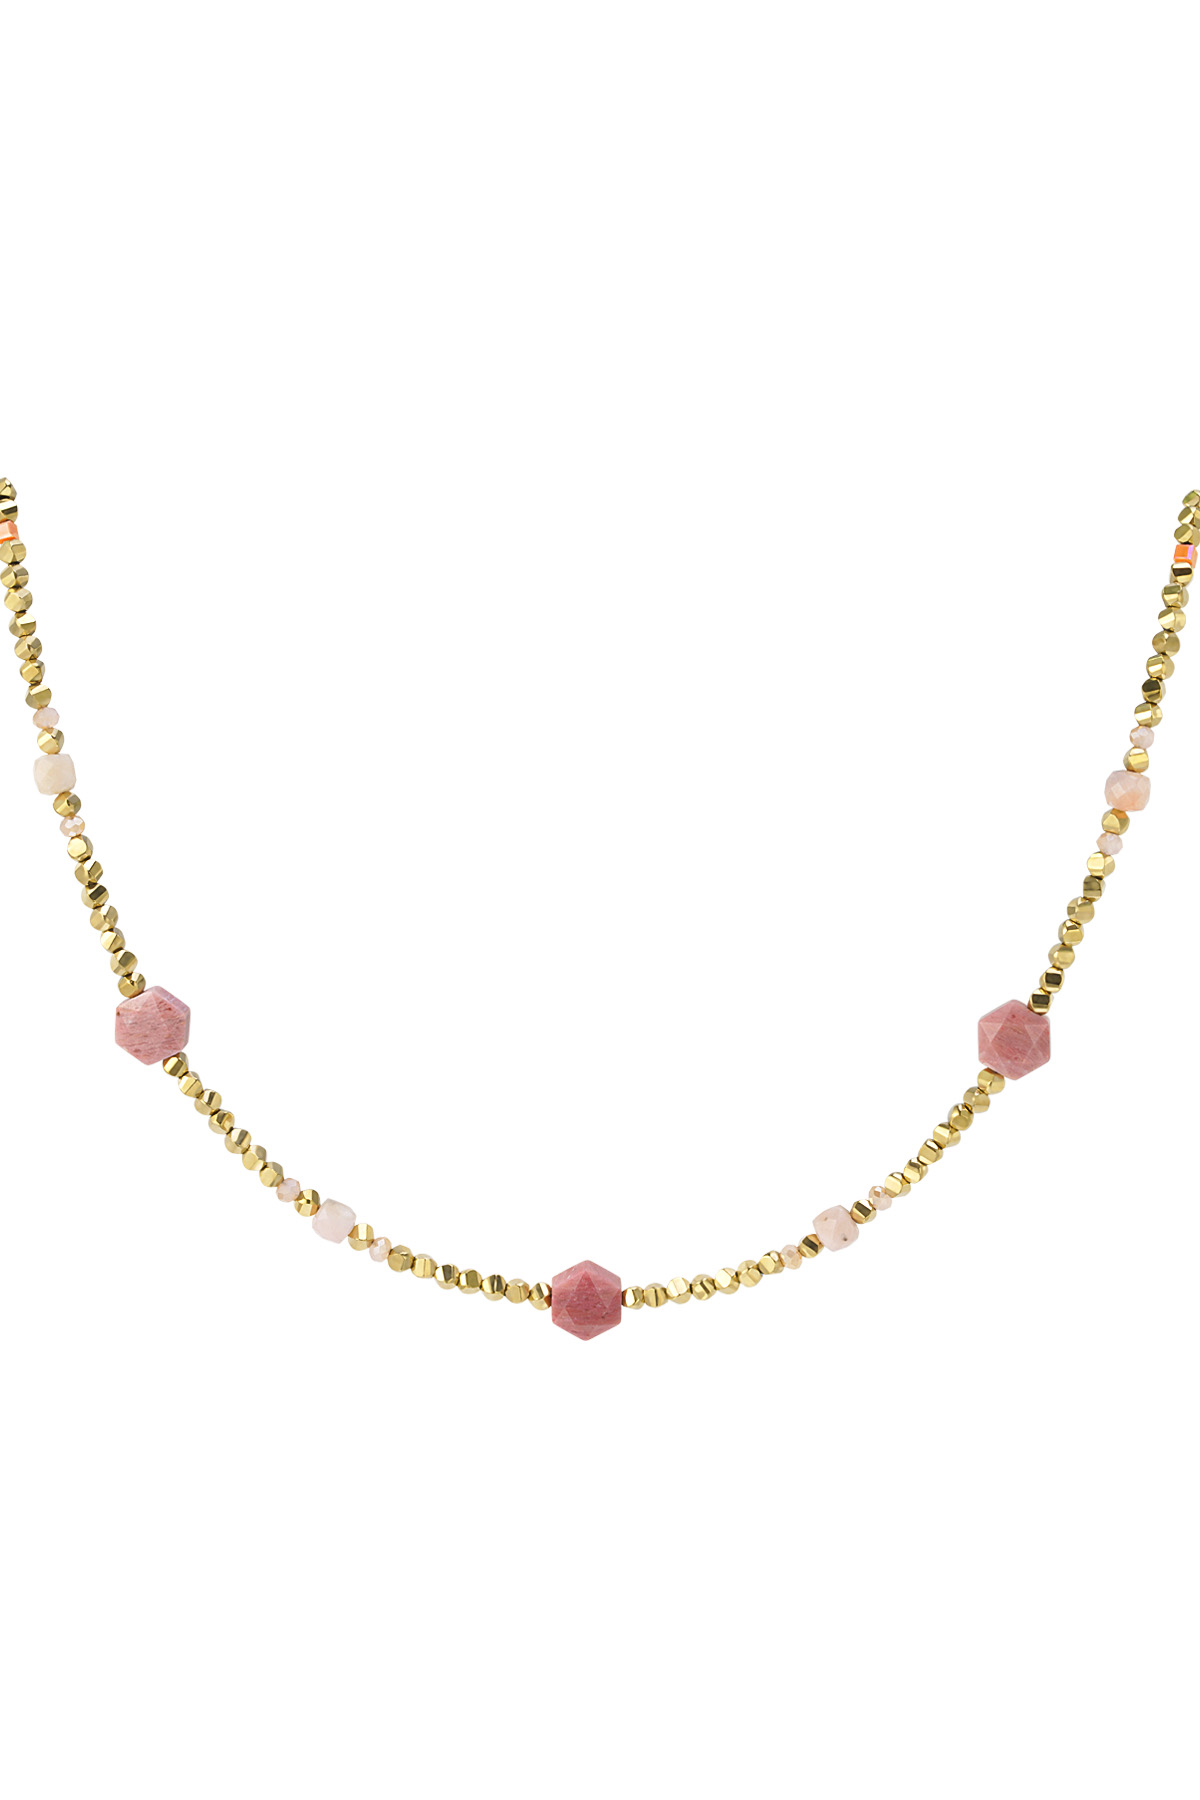 Beaded necklace different beads - pink & gold Stainless Steel h5 